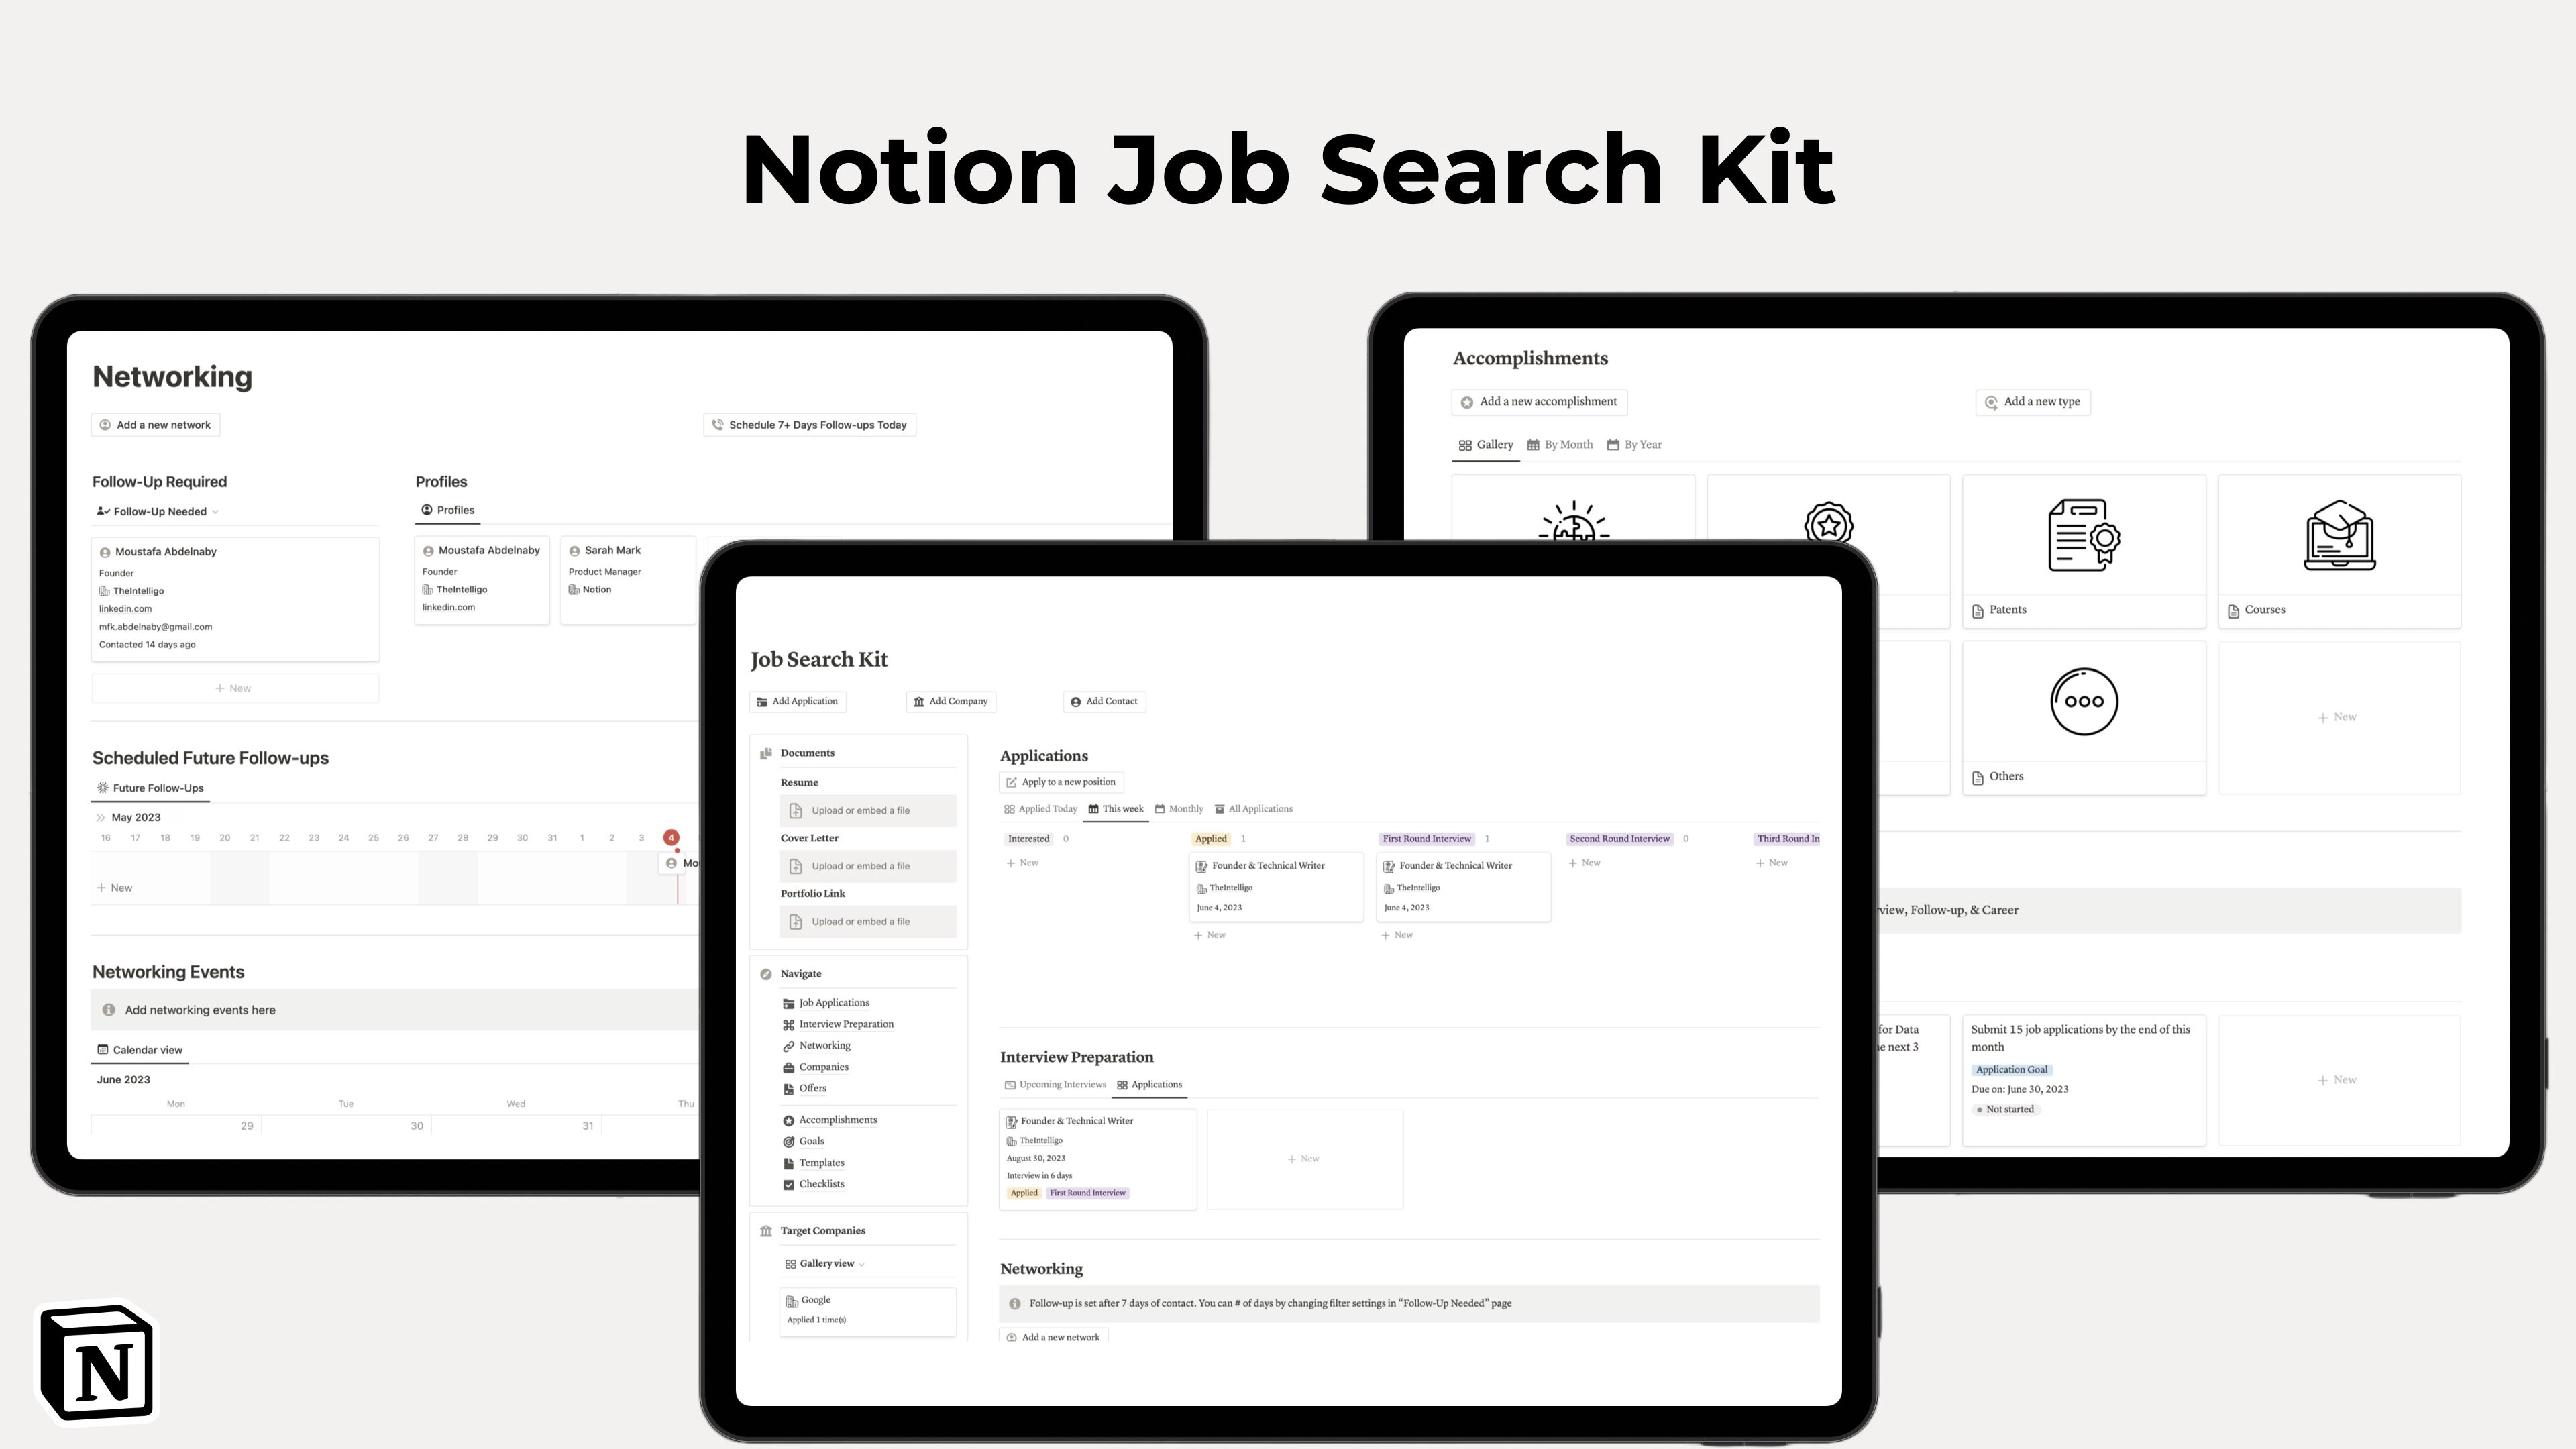 A comprehensive Notion job search template to help you organize applications, track networking contacts, set career goals, and land your next opportunity.

